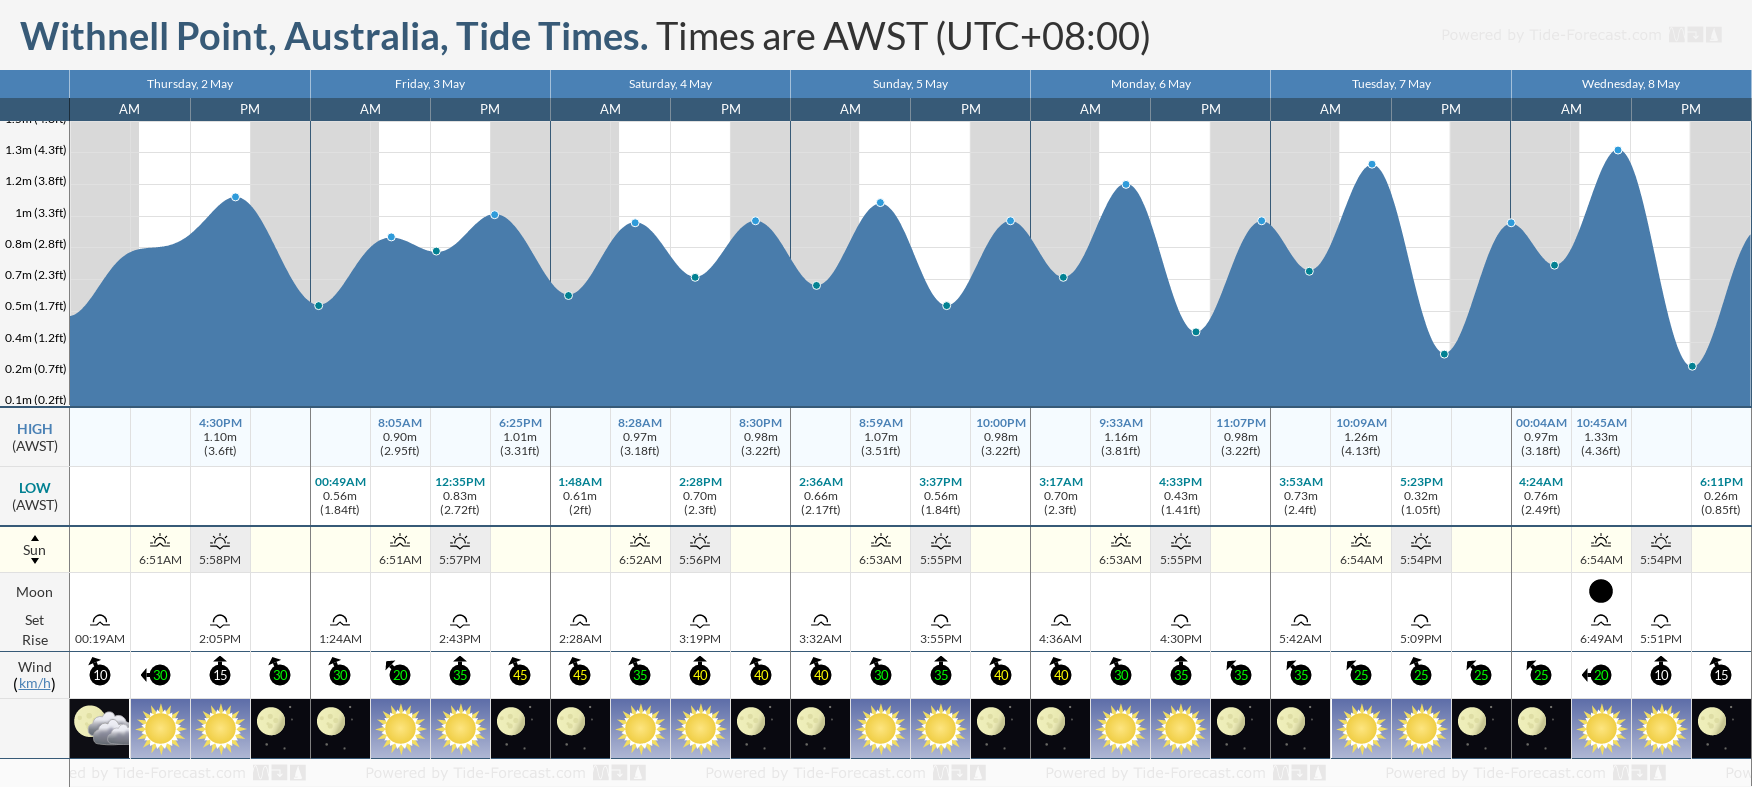 Withnell Point, Australia Tide Chart including high and low tide tide times for the next 7 days